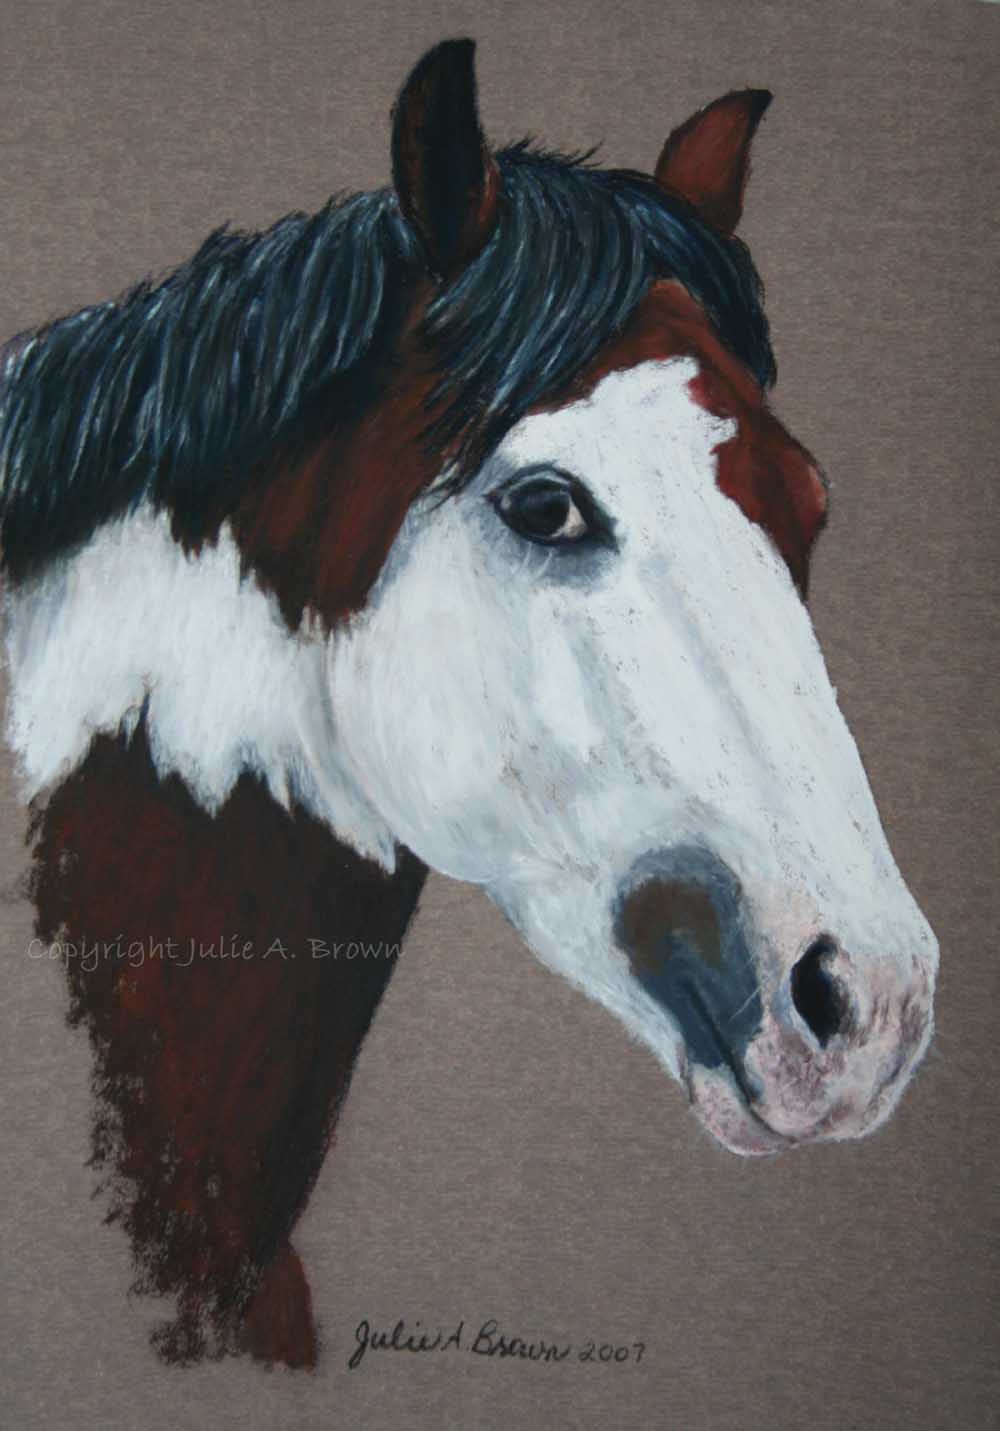 Wally - Pastel horse portrait by Julie A. Brown